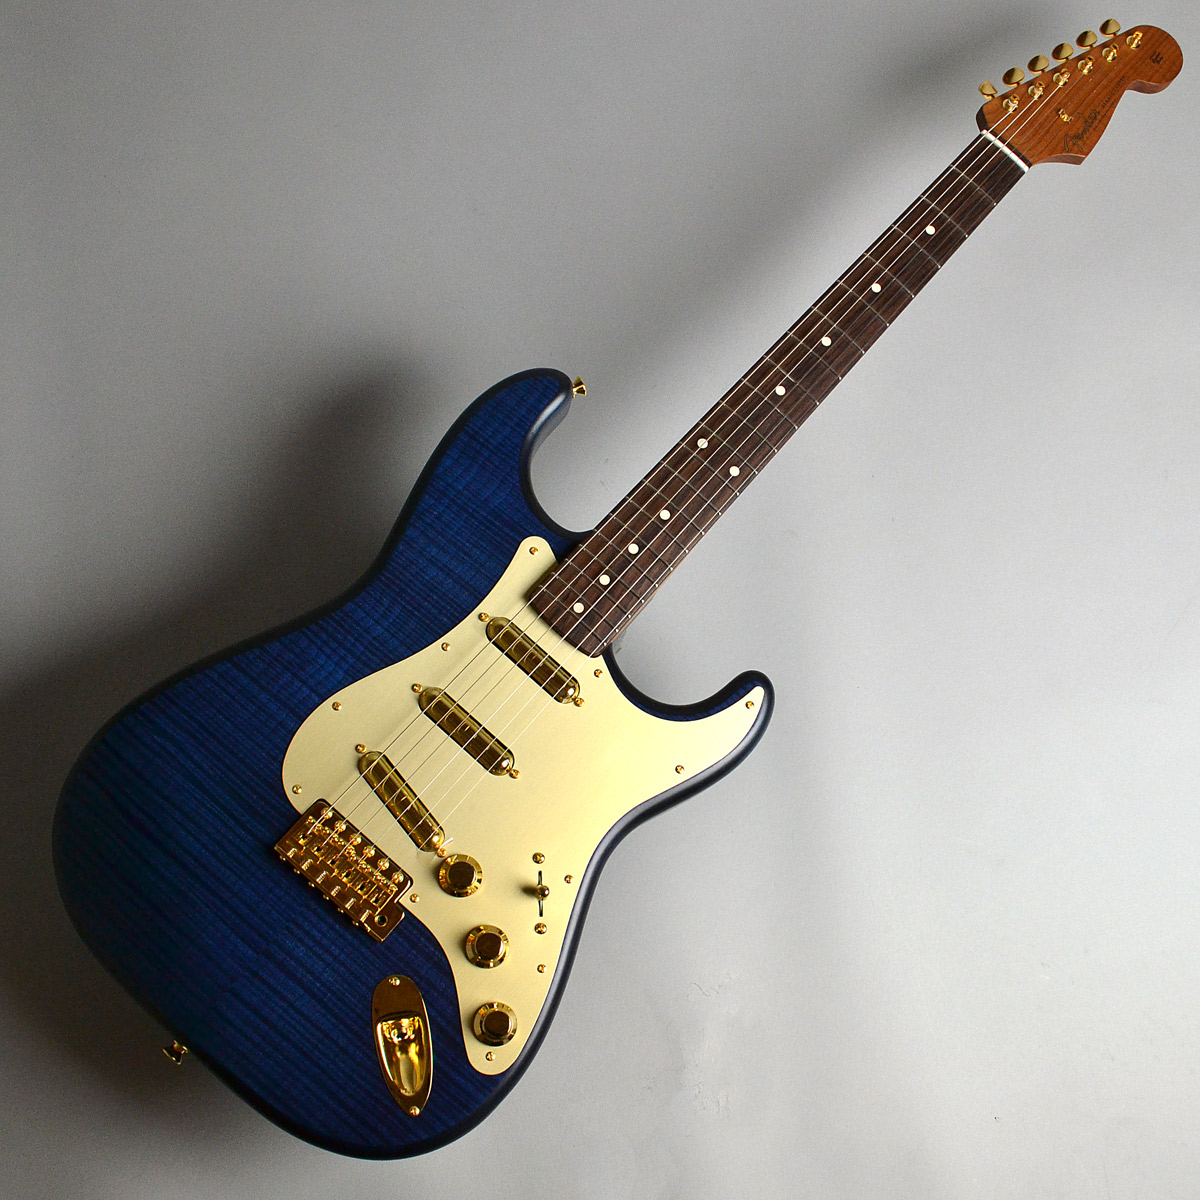 *Made in Japan 2020 Limited Collection Stratocaster Indigo Dye 最新の技術や新しいものづくりへの飽くなき挑戦を行うLimited Collectionの2020 Spring/Summer Collectionは、日本古来からの伝統的な技 […]